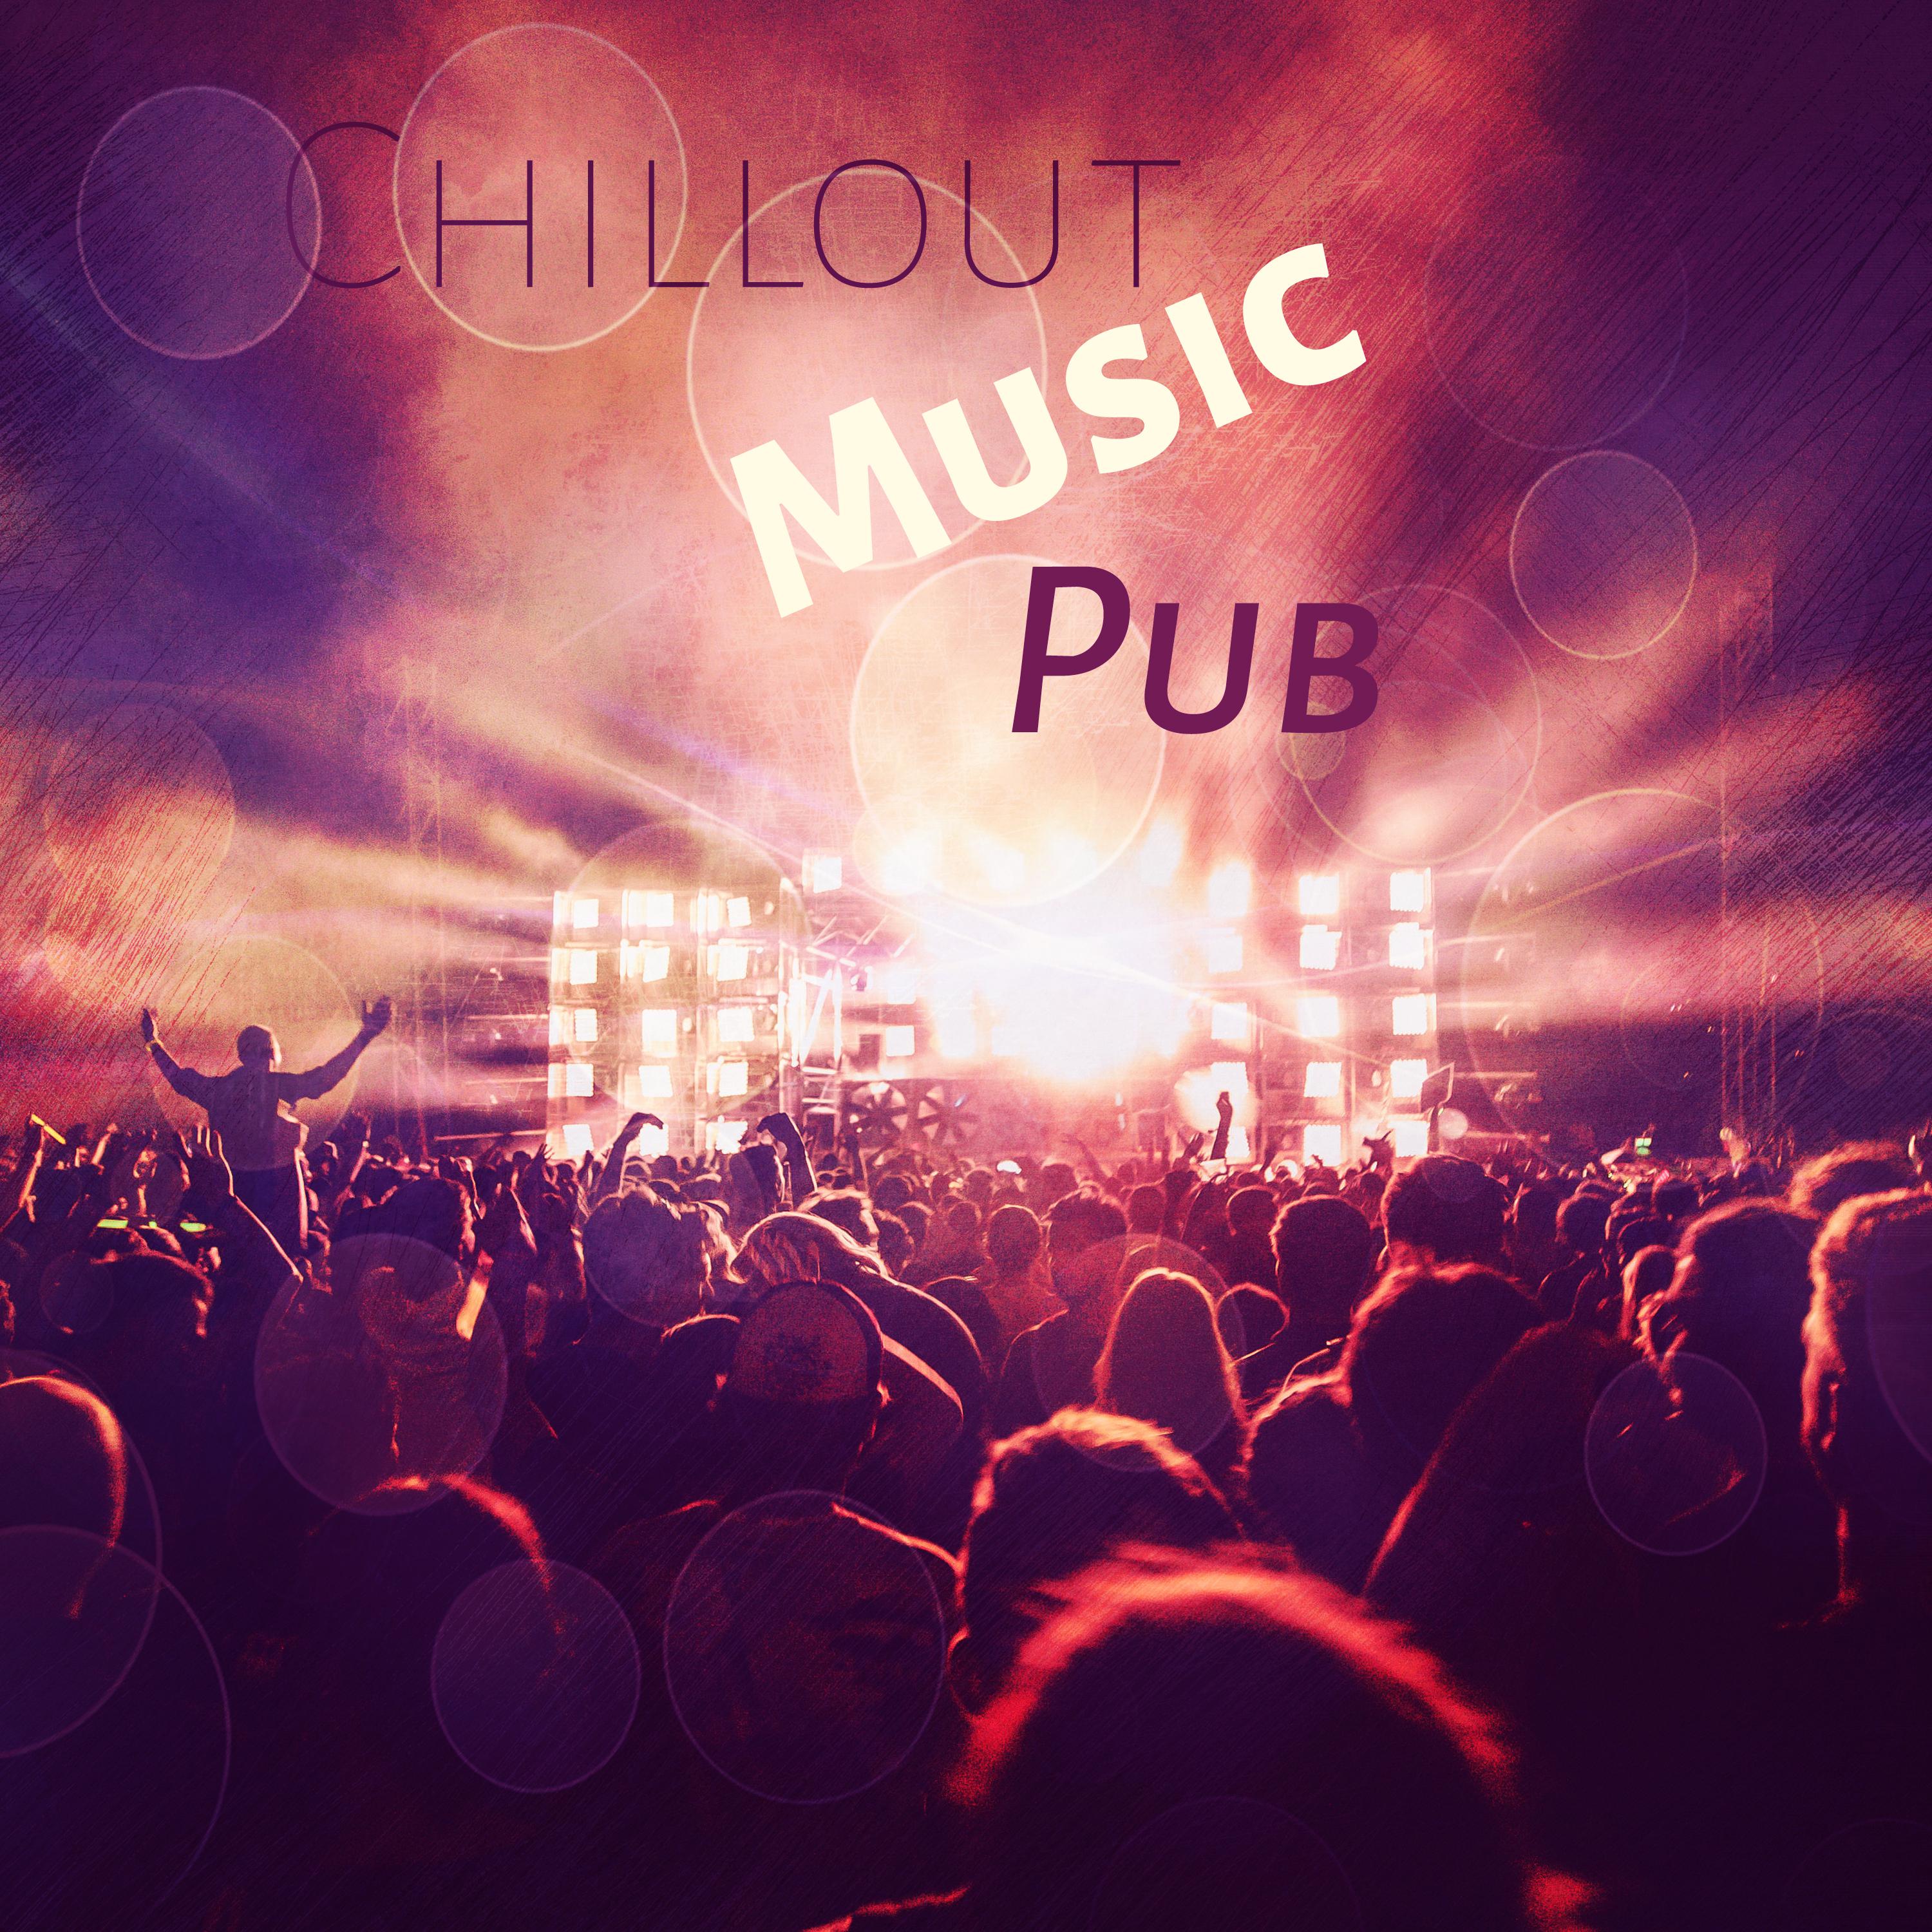 Chillout Music Pub  Deep Beats of chillout Music for Bar  Club, Chillout Pub